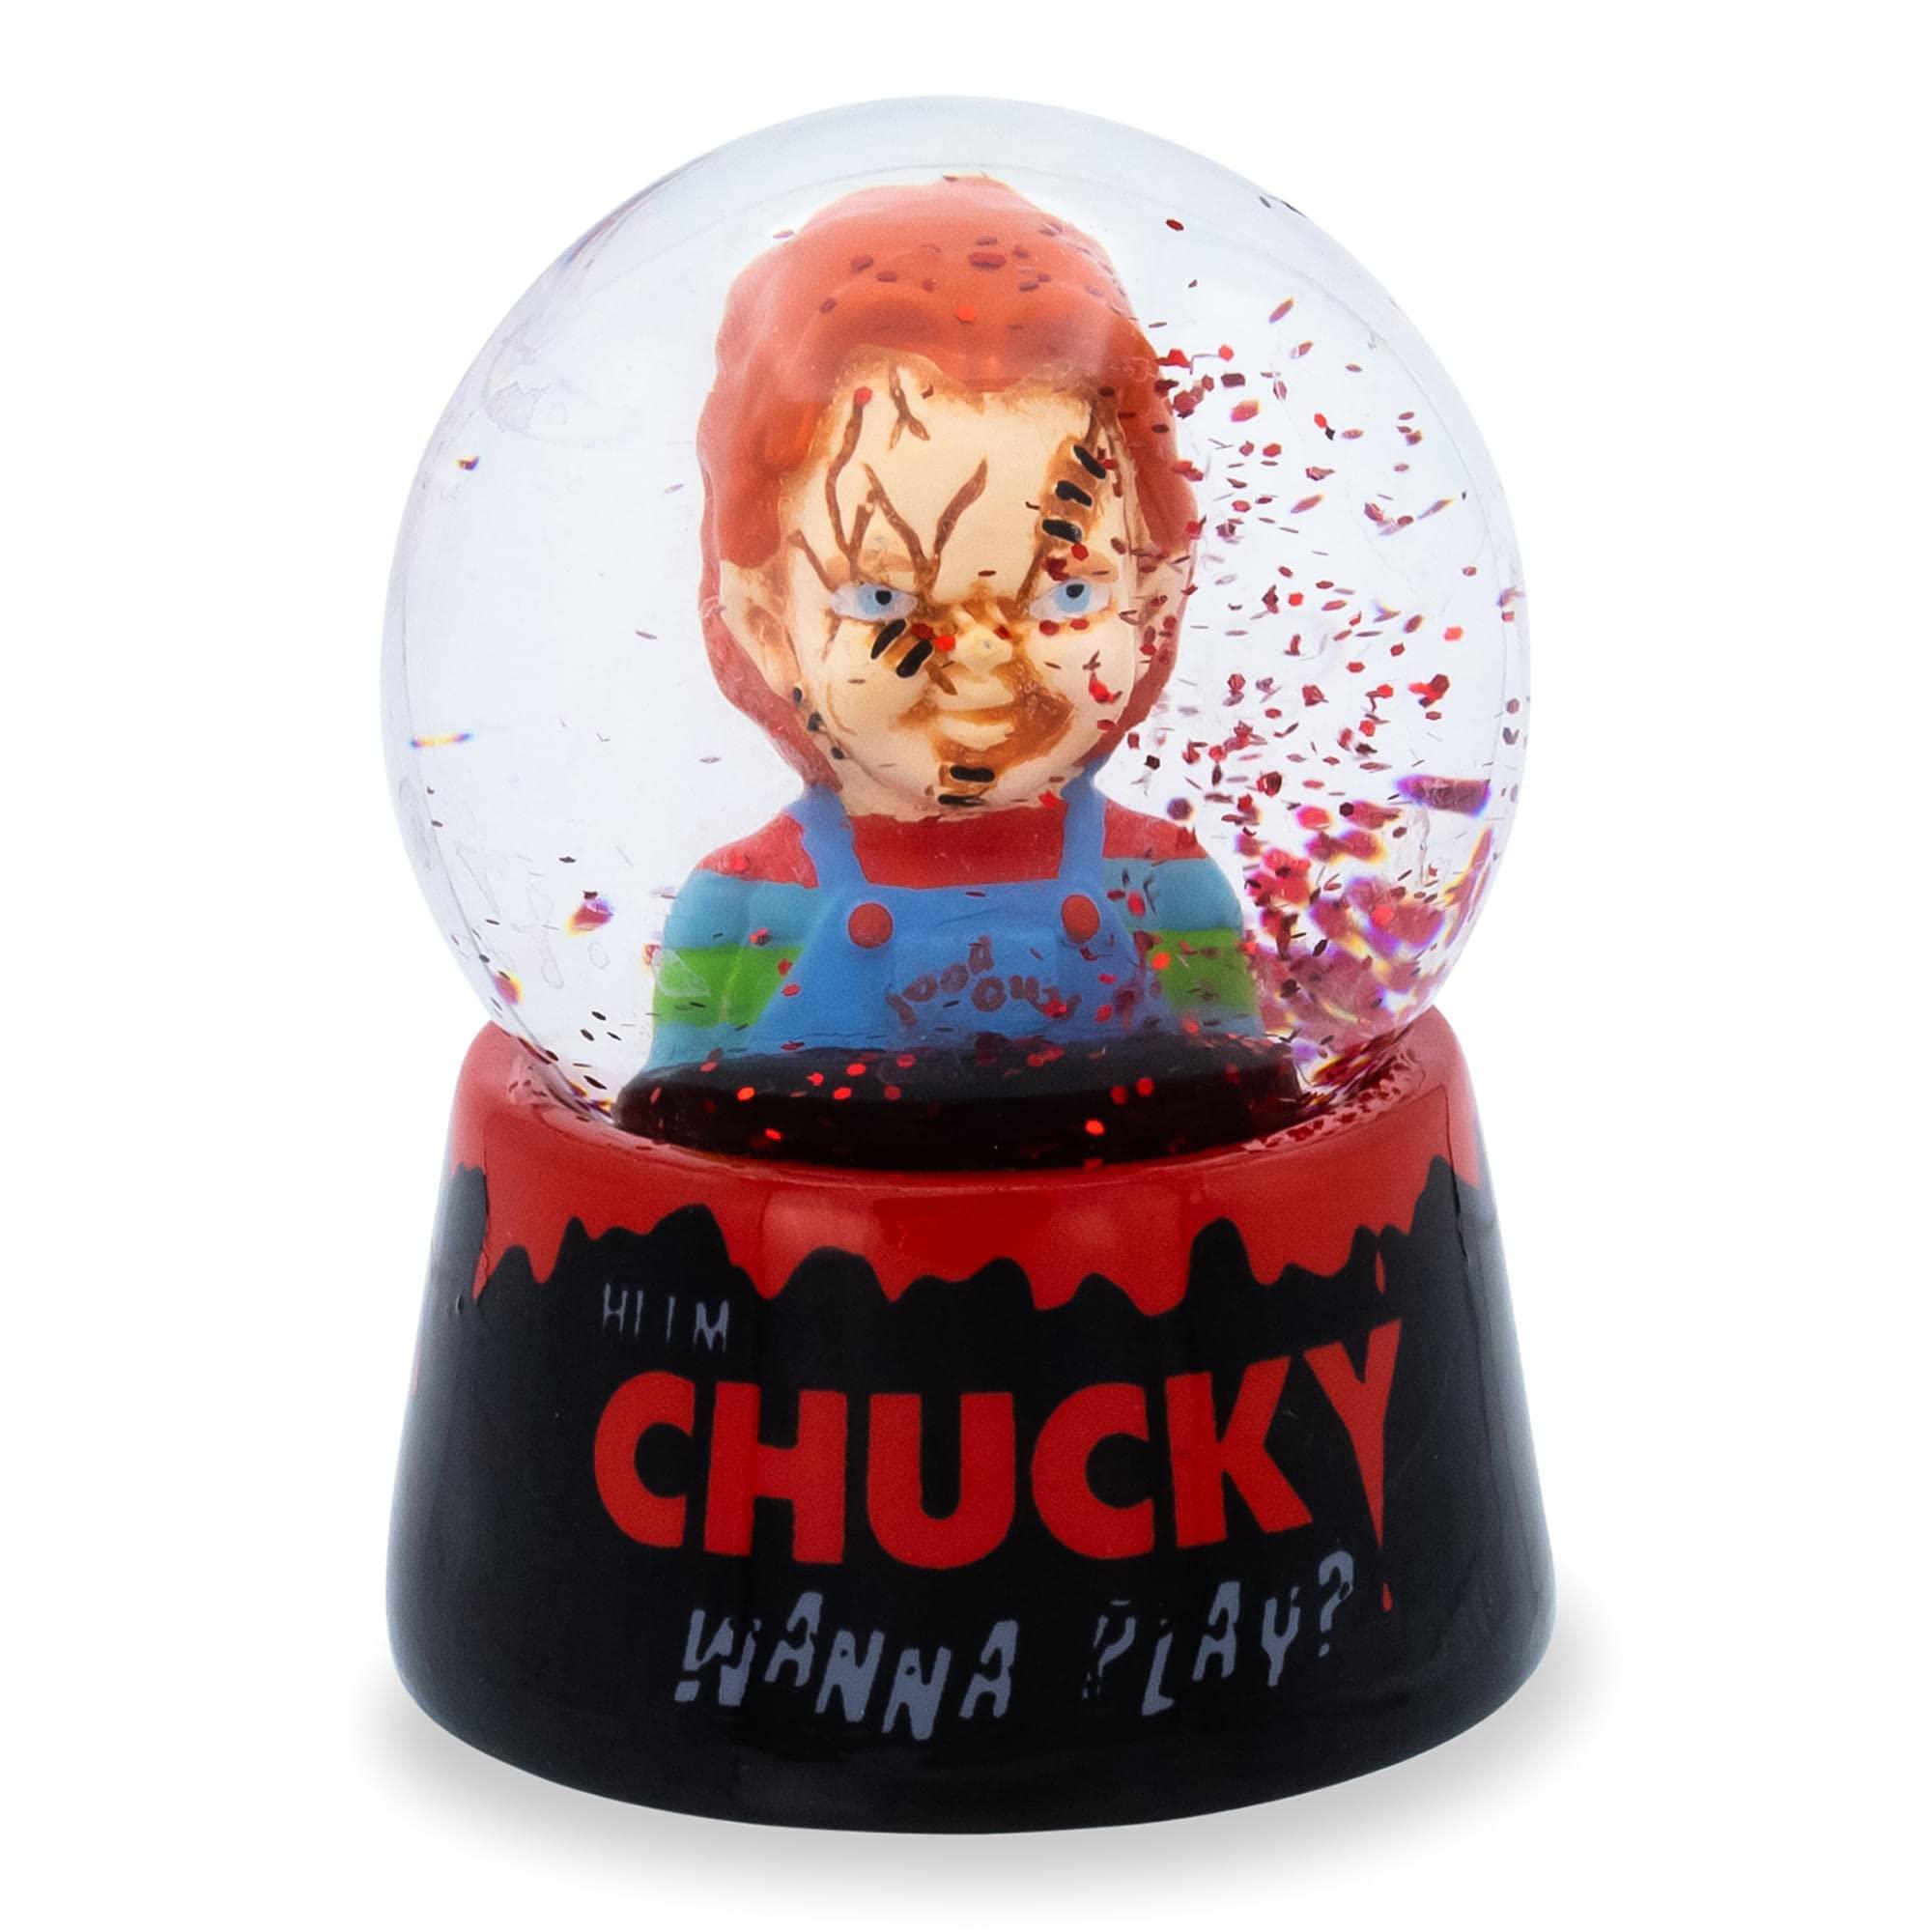 toynk child's play chucky wanna play? 3-inch mini snow globe with swirling glitter display piece | horror movie collectible k